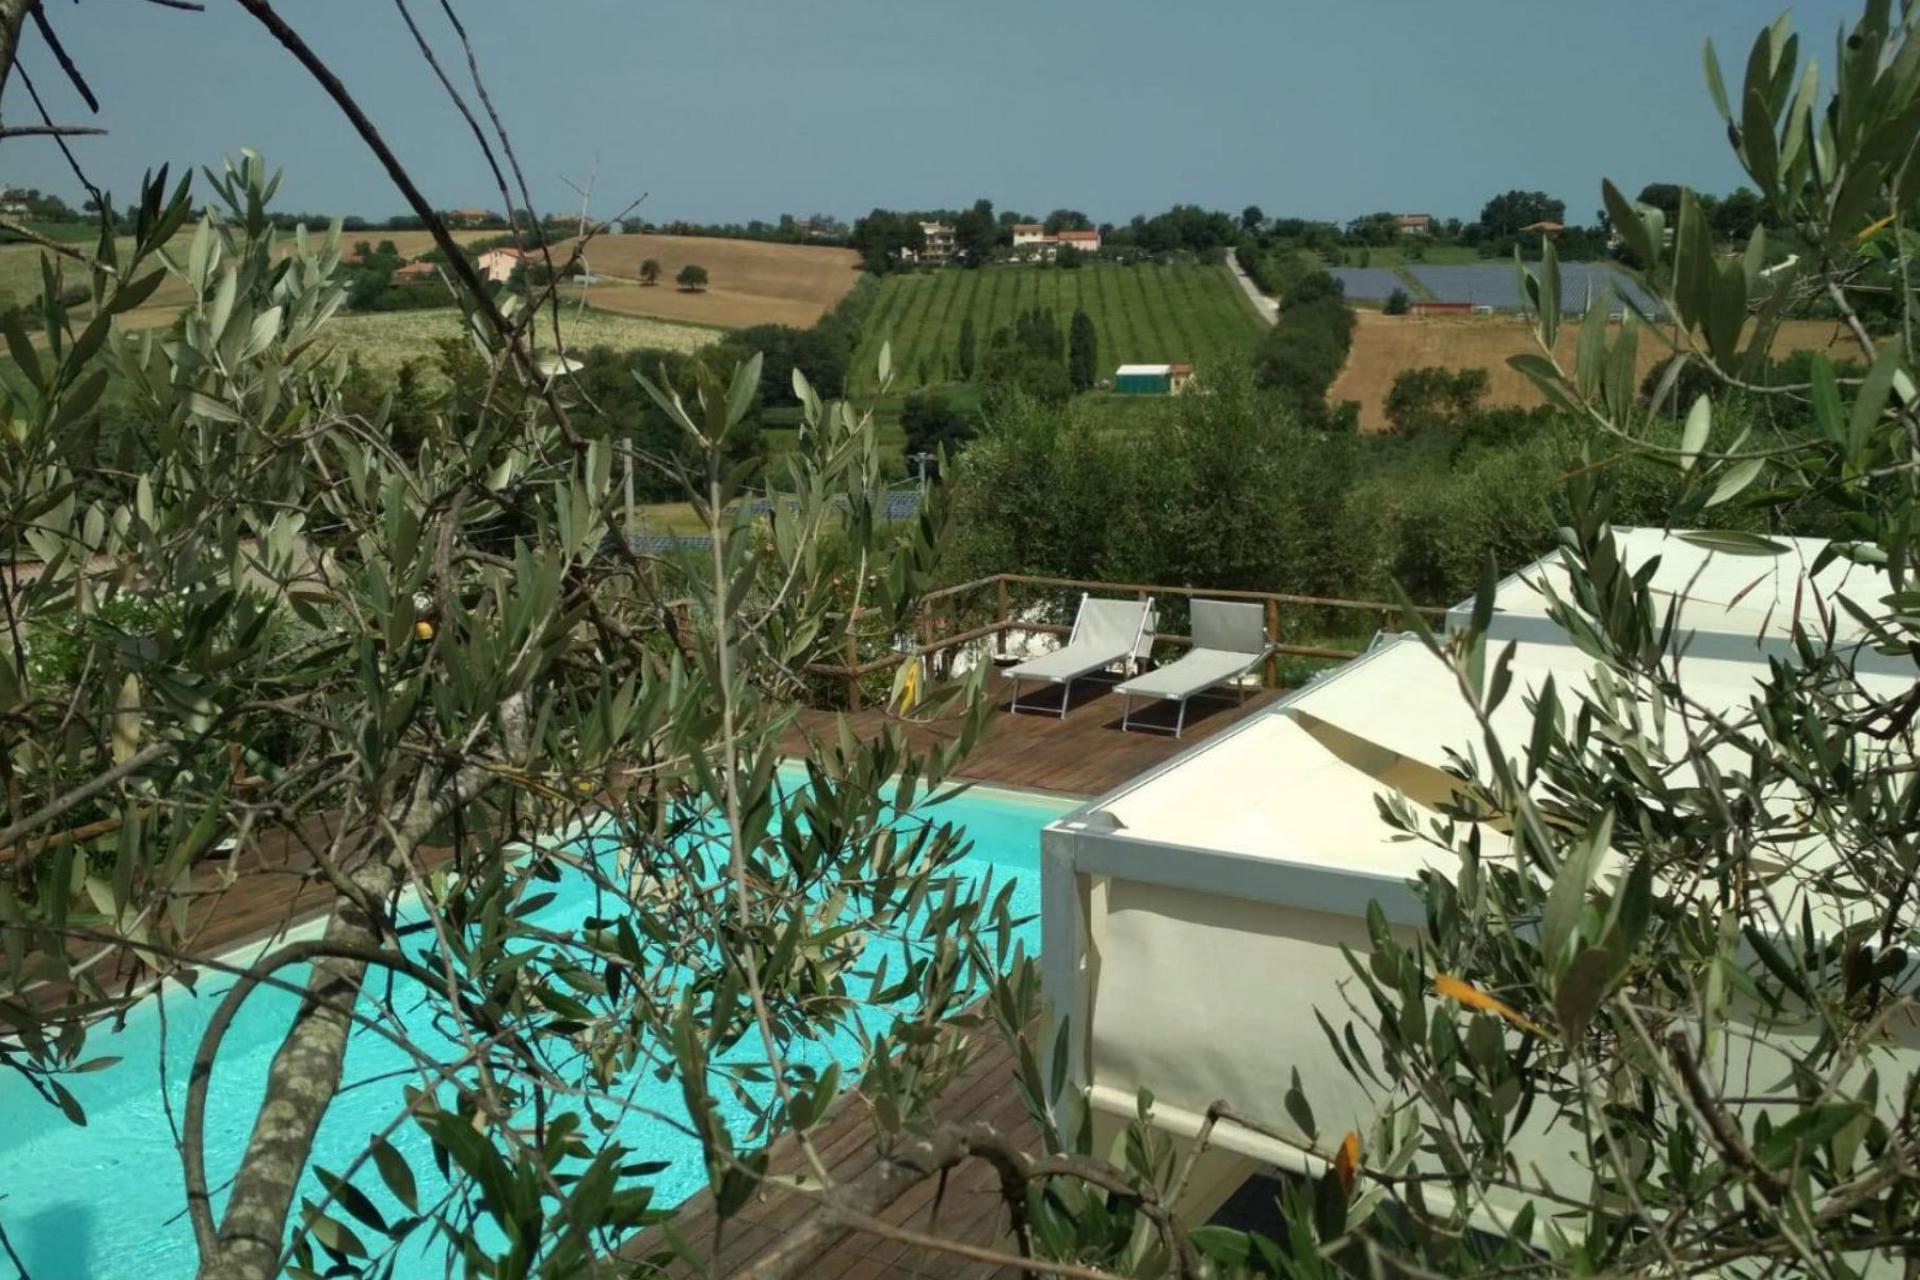 Agriturismo Marche with restaurant in an olive grove